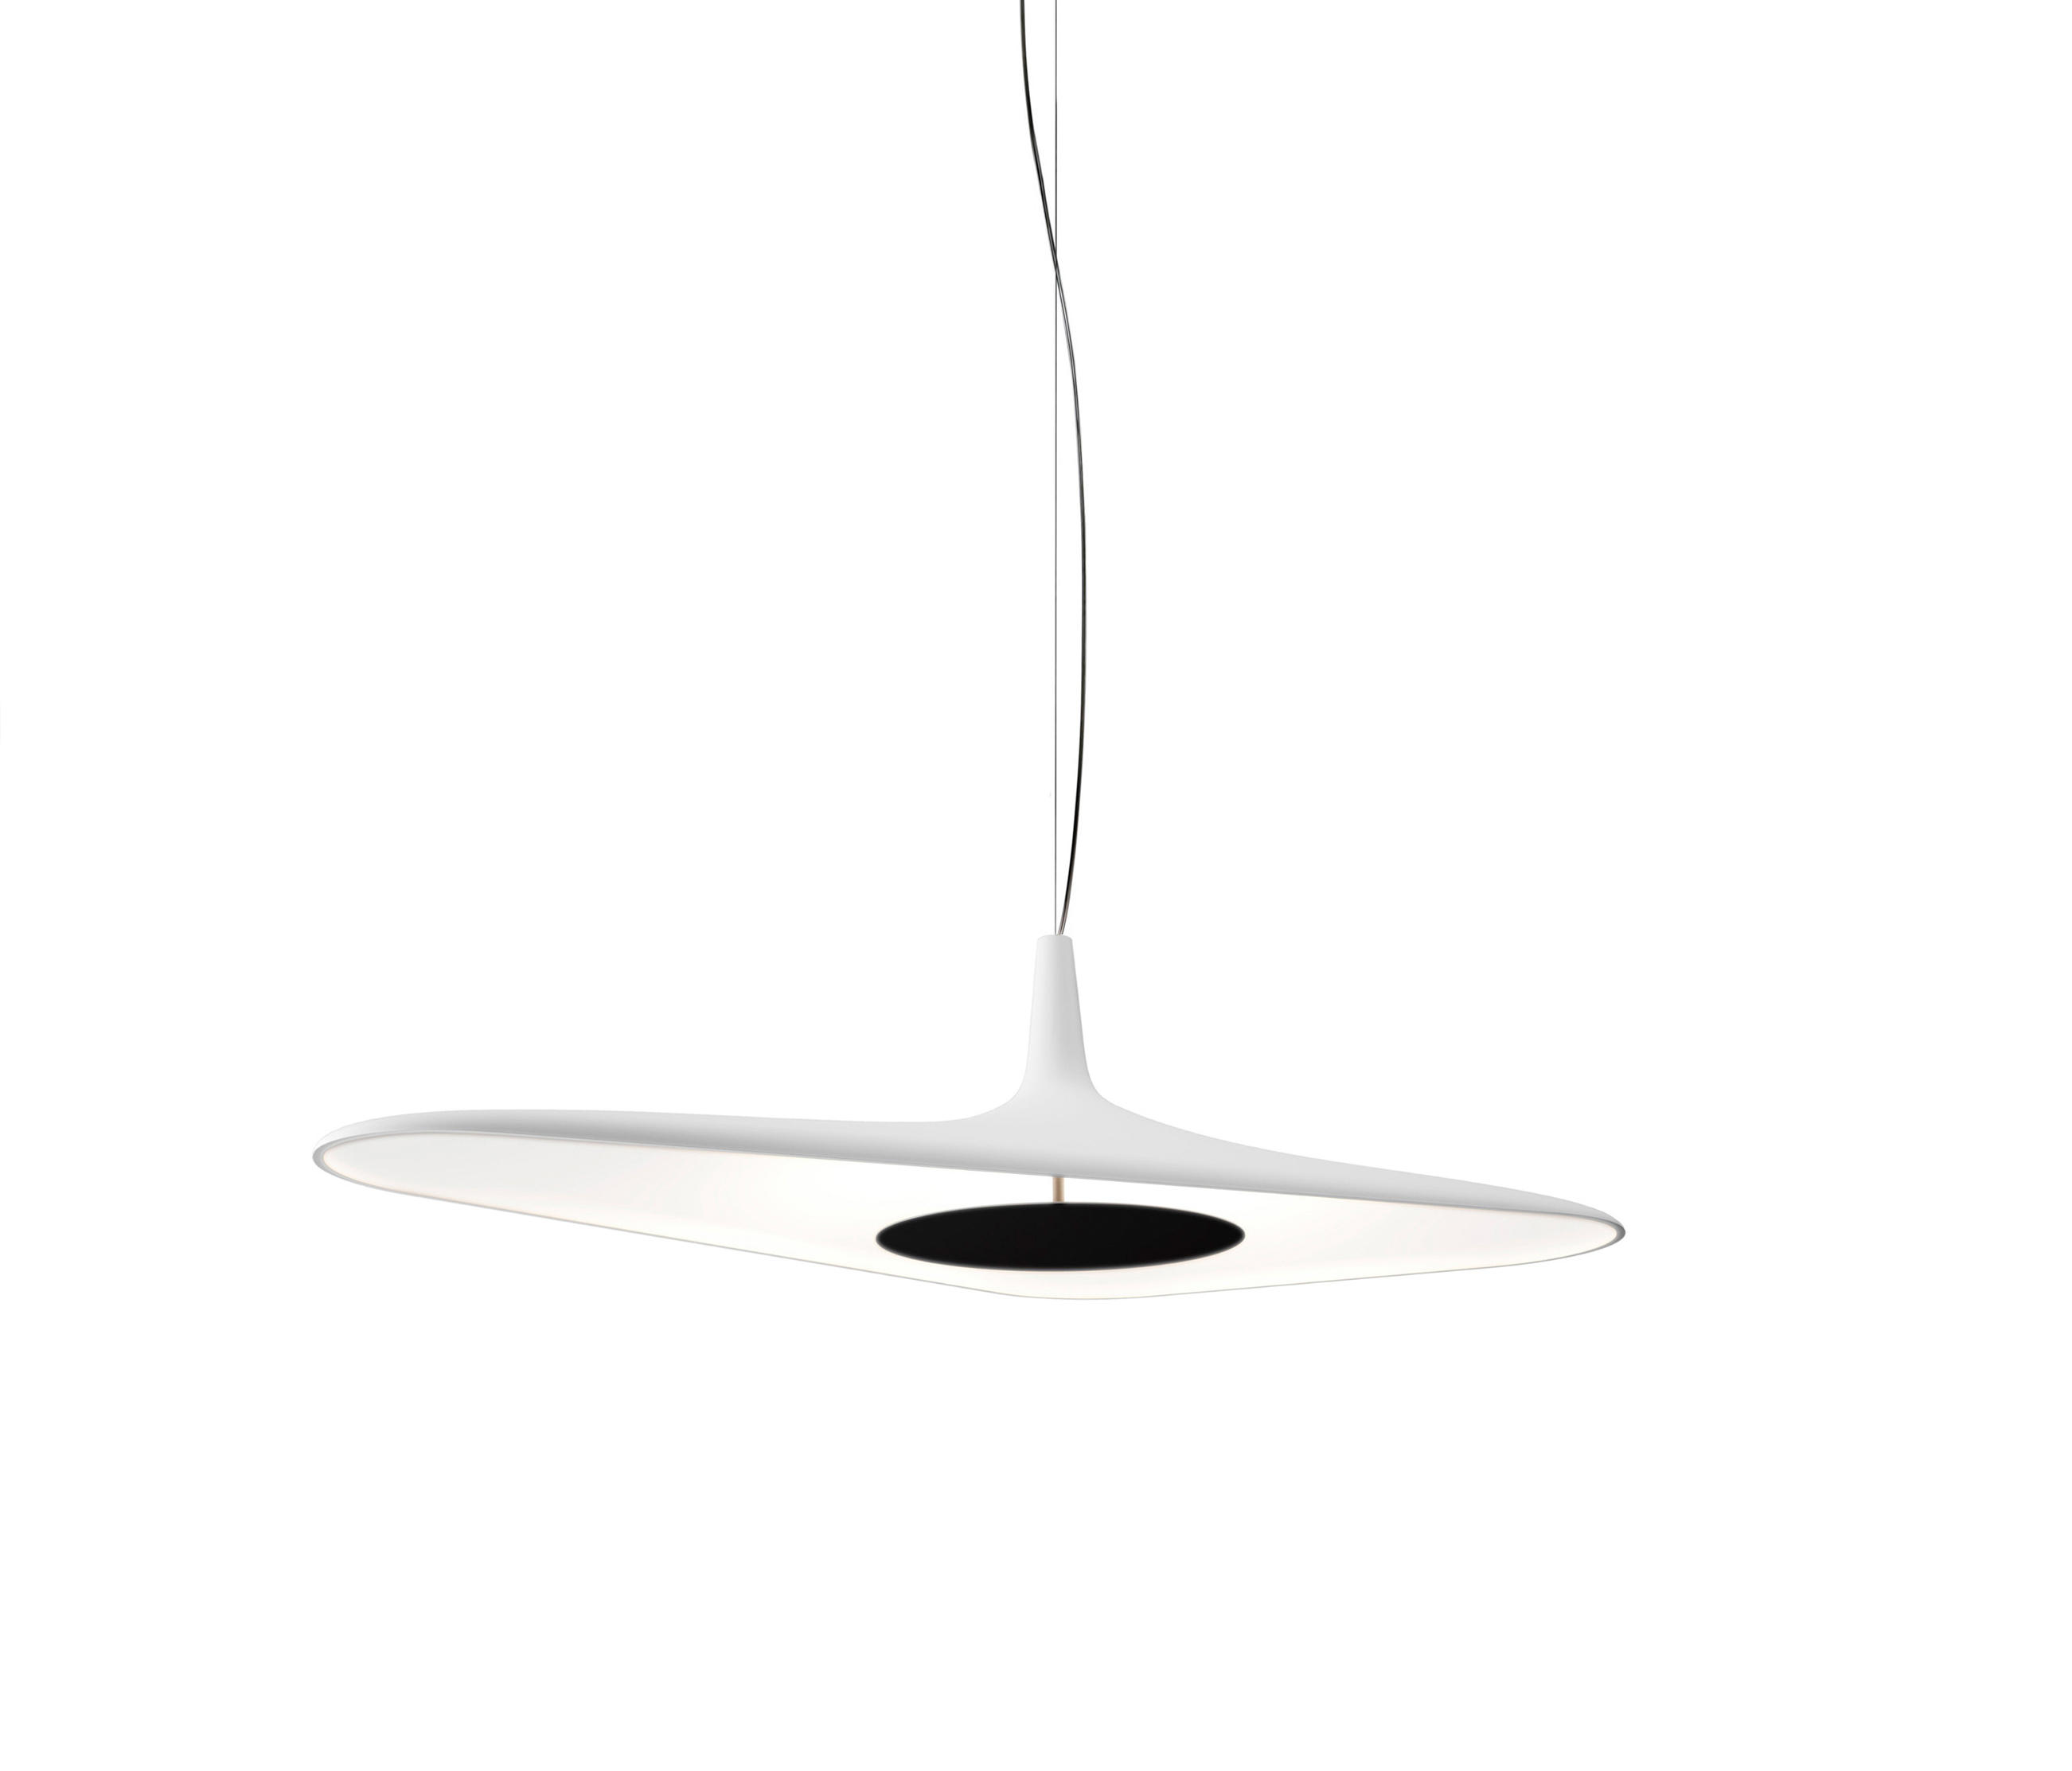 SOLEIL-NOIR - General lighting from LUCEPLAN | Architonic